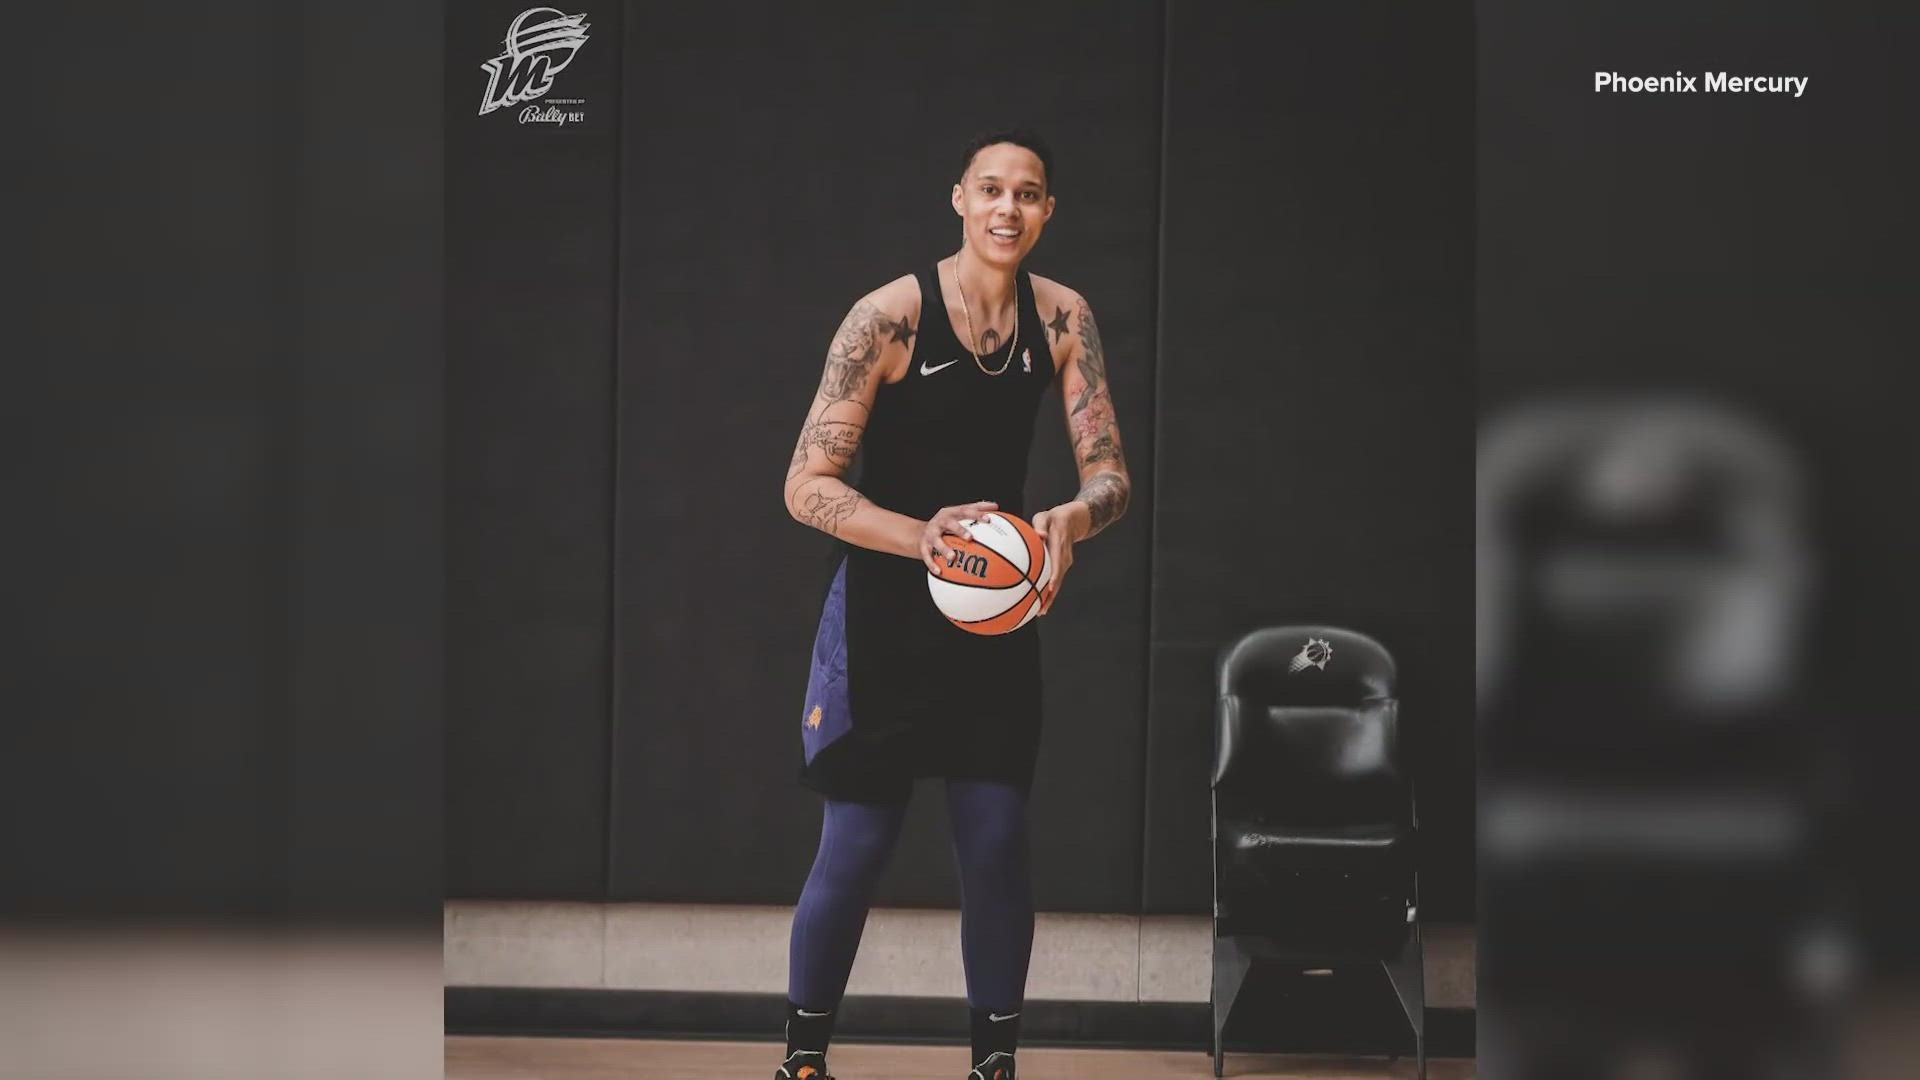 Griner, who was a free agent, re-signed with the Mercury on a one-year contract according to a person familiar with the deal.